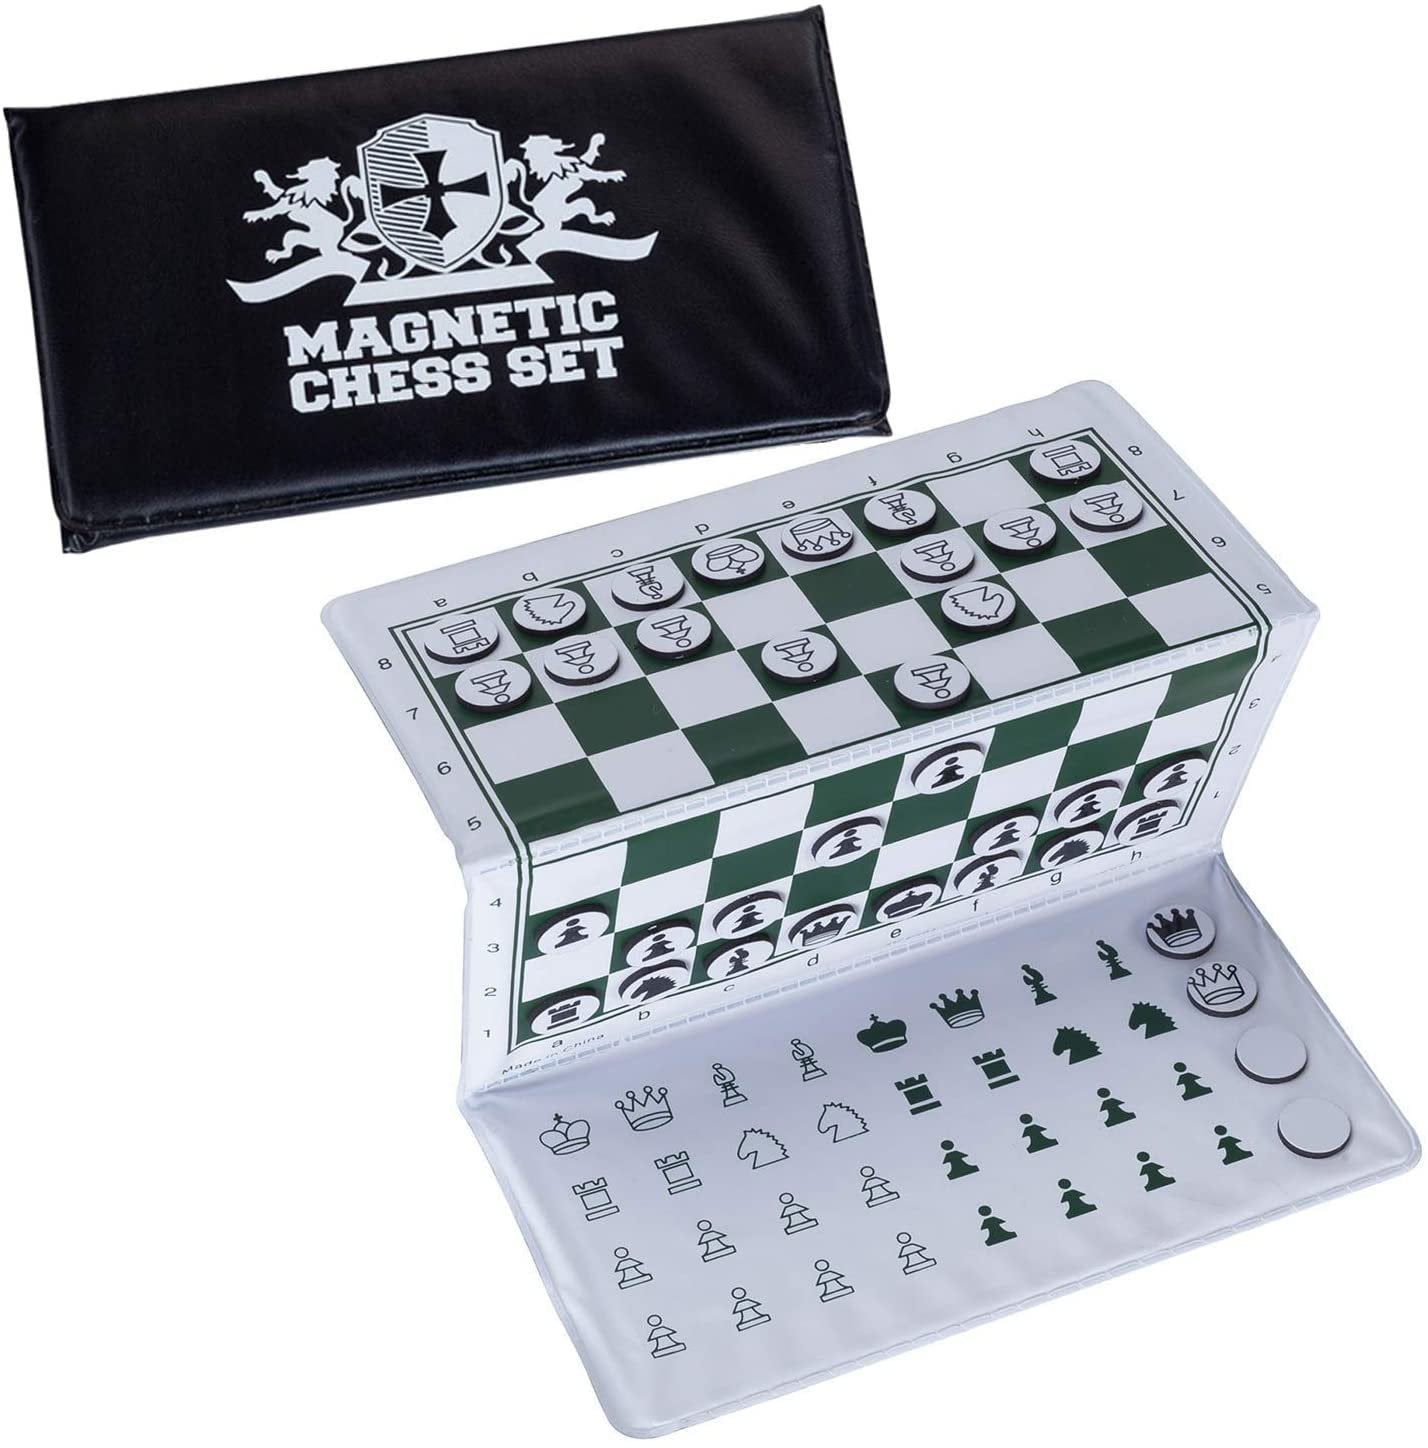  WE Games Best of Travel Chess Sets - Chess Board is Tournament  Style Roll Up - 20 inches, 34 Chess Pieces, Portable Chess Set Bag,  Includes Equalizer Dice & How to